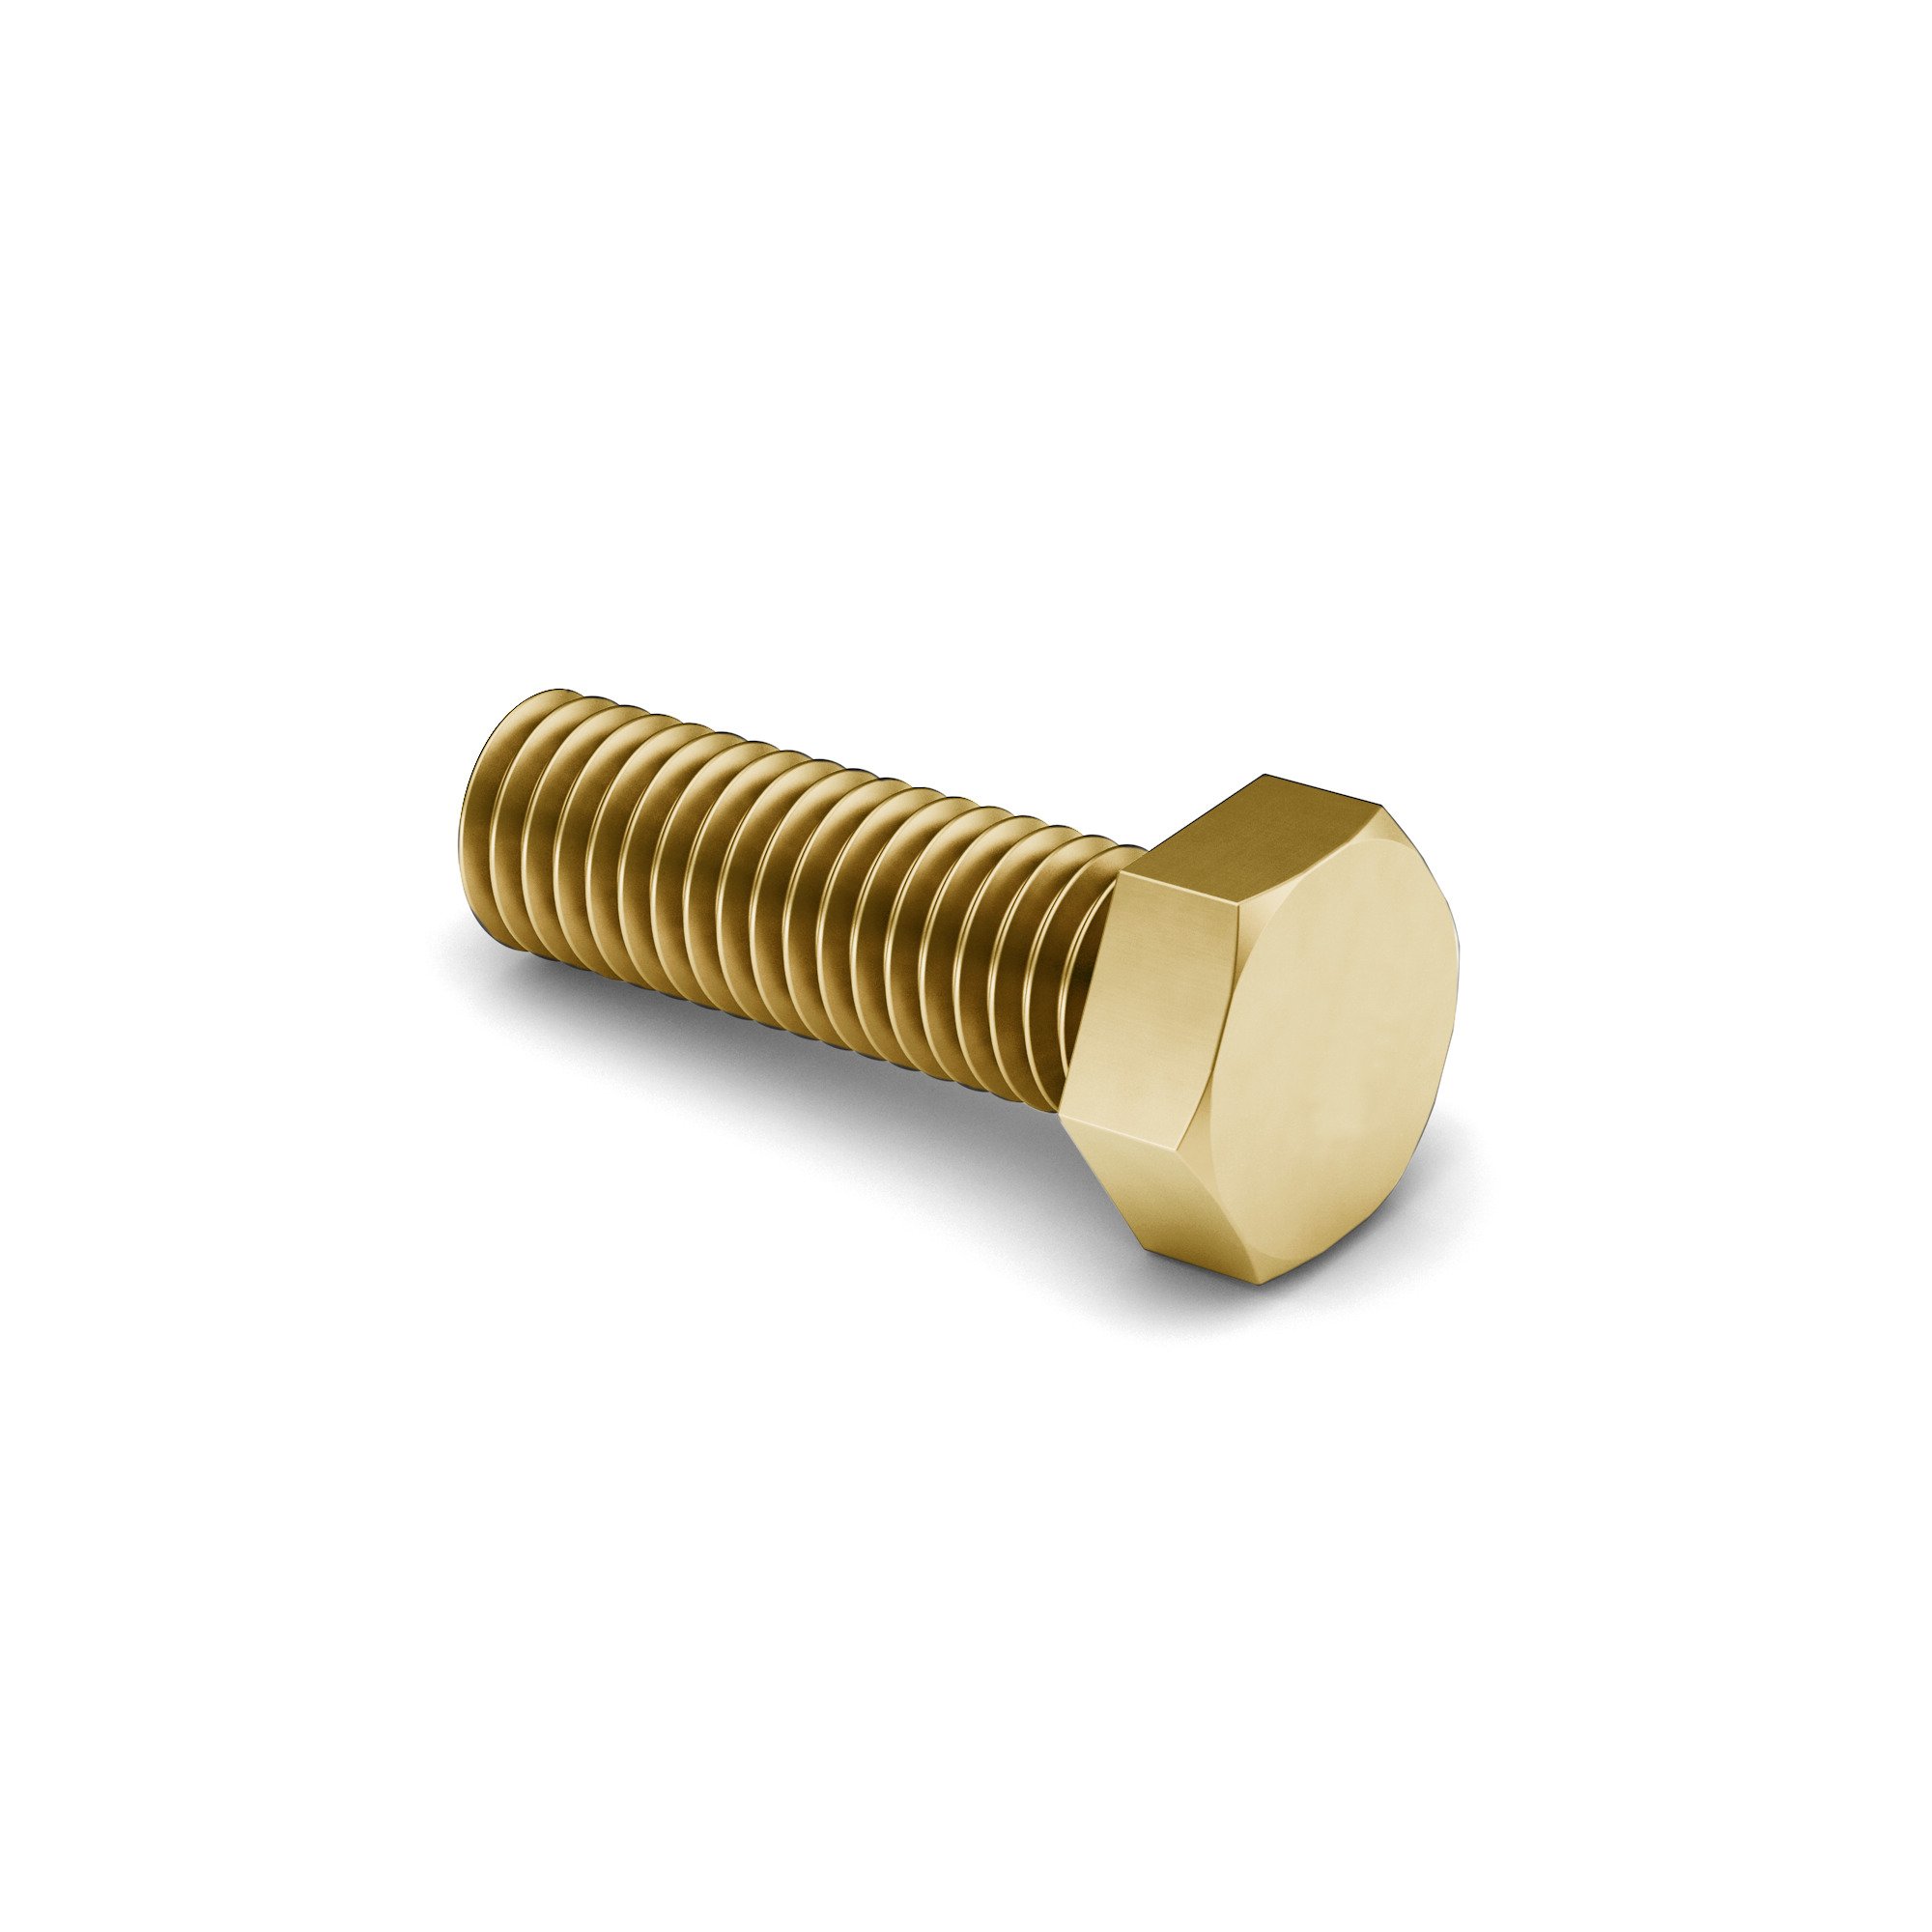 1/4-20x5/8 J429 GR 5 Hex Set Screw Zinc Yellow Chromate, 0.00015/.00025 thick in Accorance with ASTM B633 TYPE II